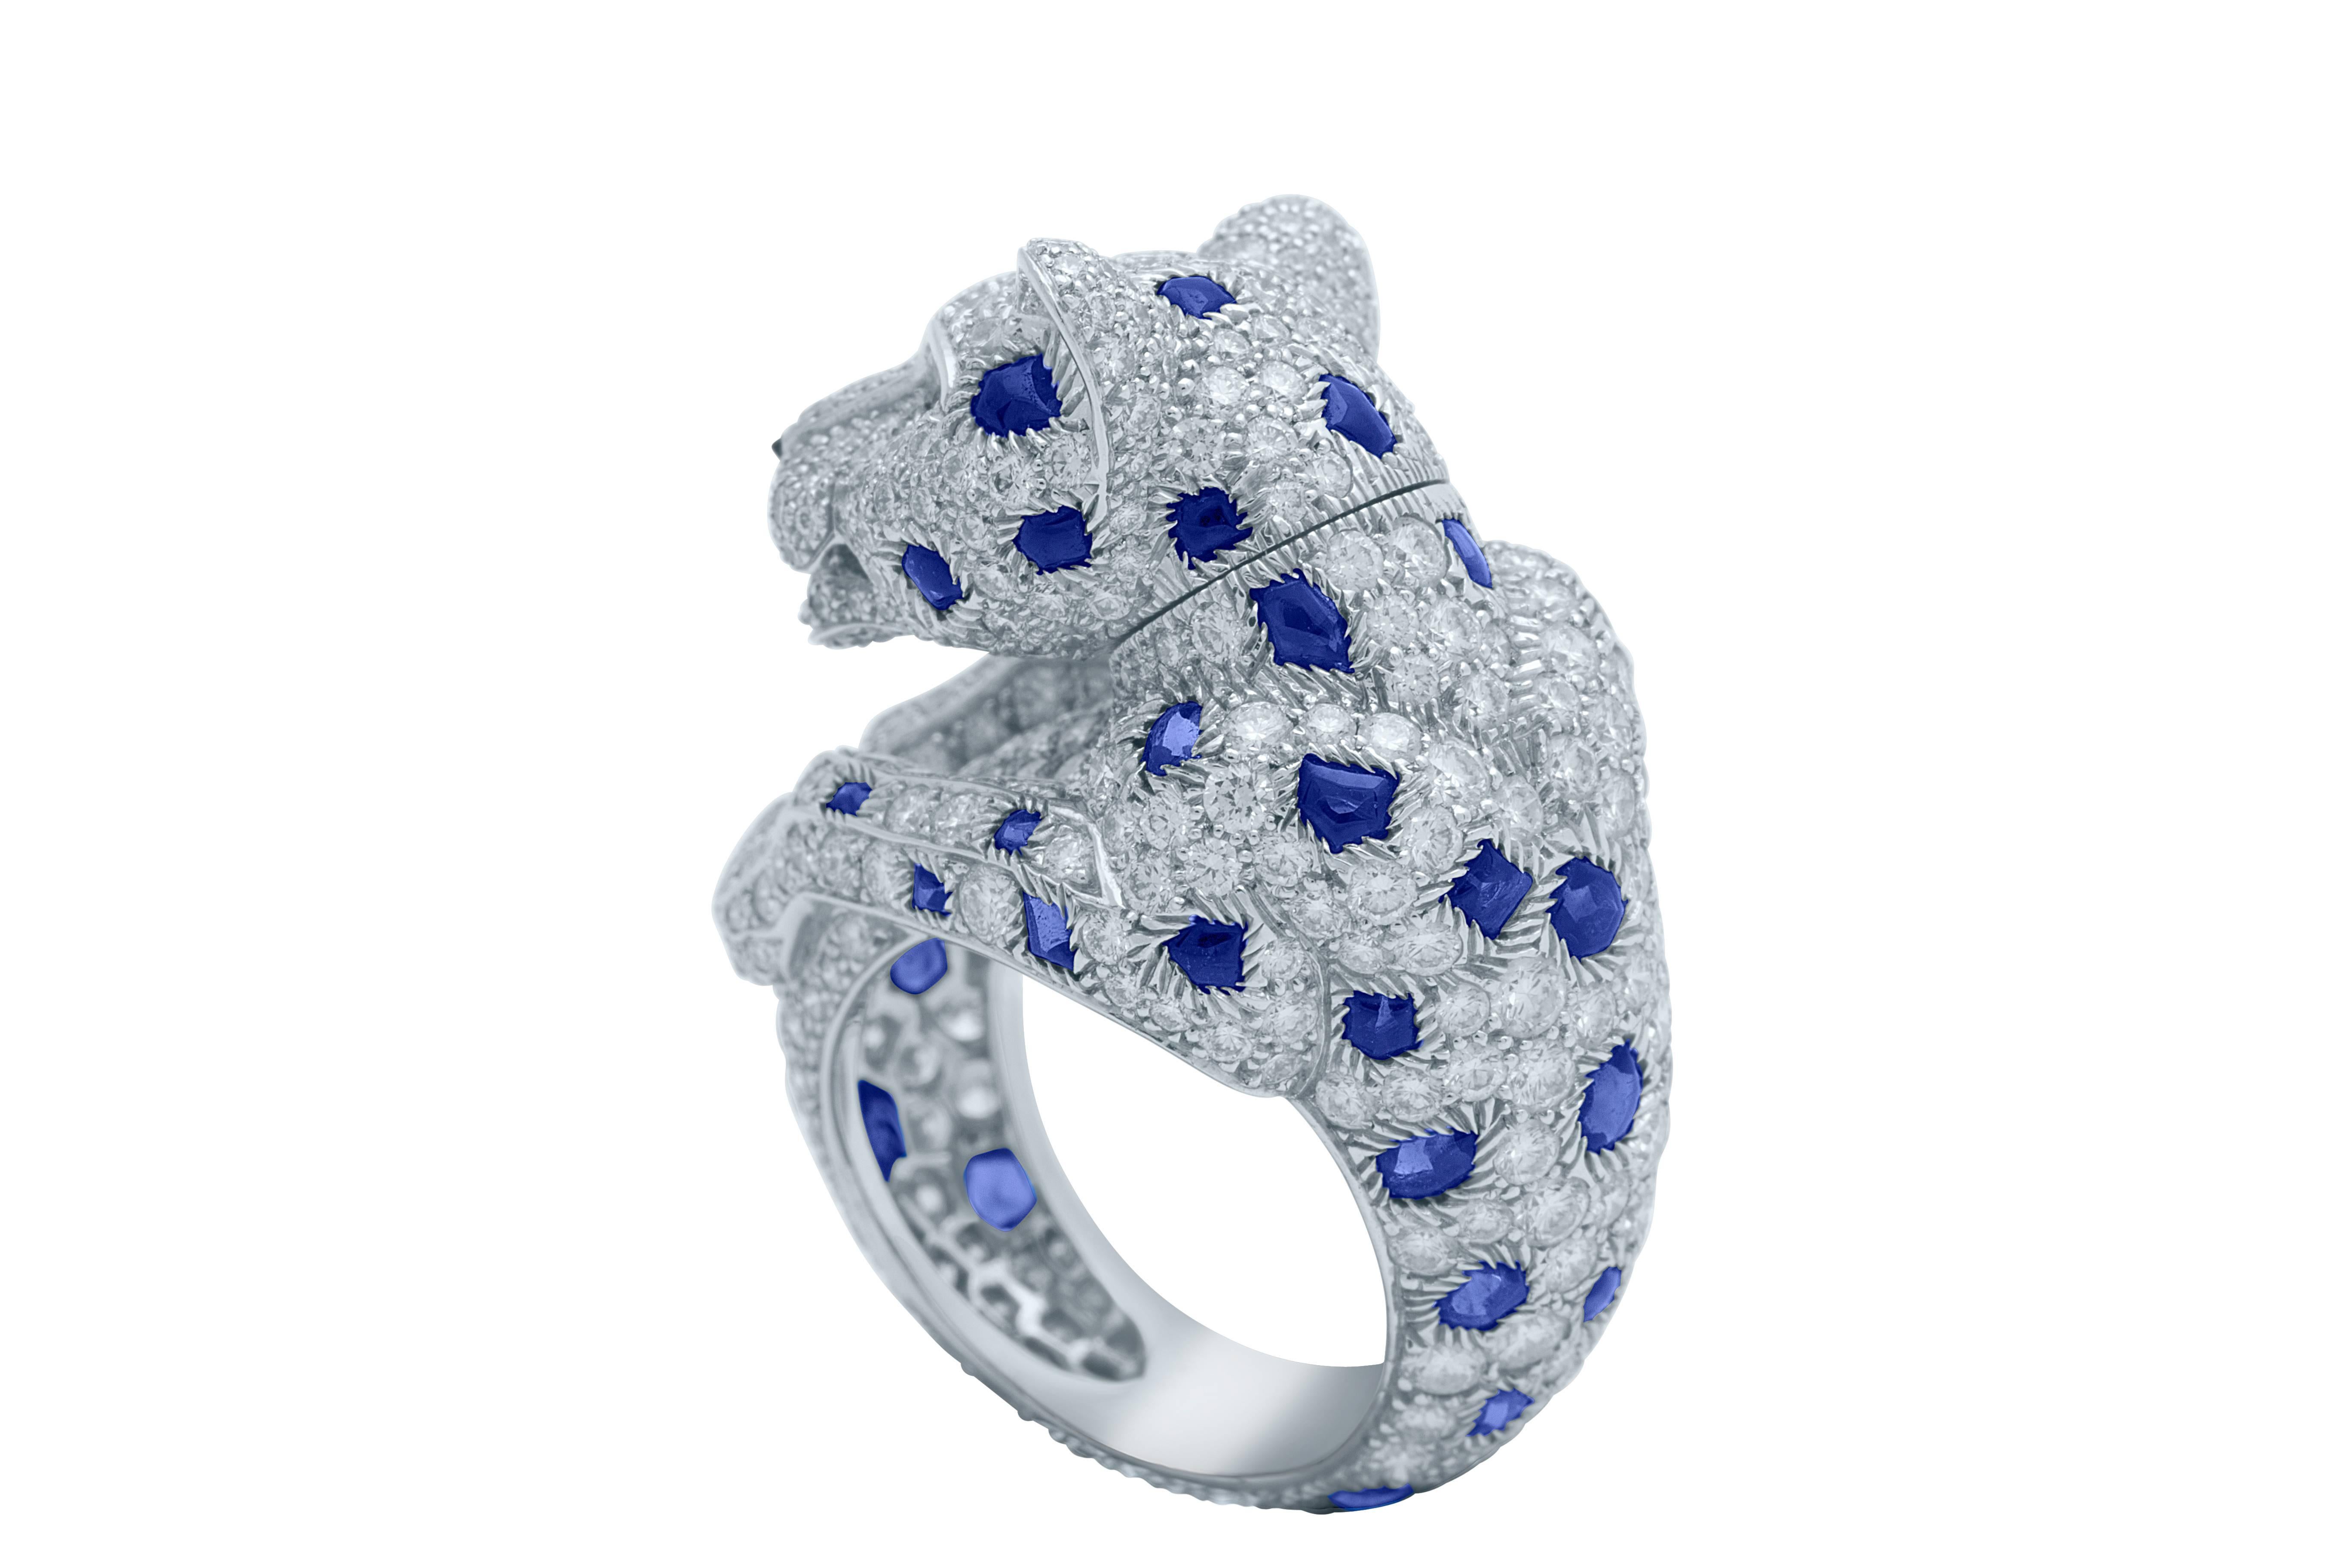 Cartier Panther de Cartier Ring in Platinum with Blue Sapphires, Emerald Eyes, Onyx, and Brilliant-Cut Diamonds.
The Panthers Head can be turned from side to side. Diamond Weight: 5.45ct, Sapphire Weight: 4.23ct, Emerald Weight: 0.12ct, Size: 5.25